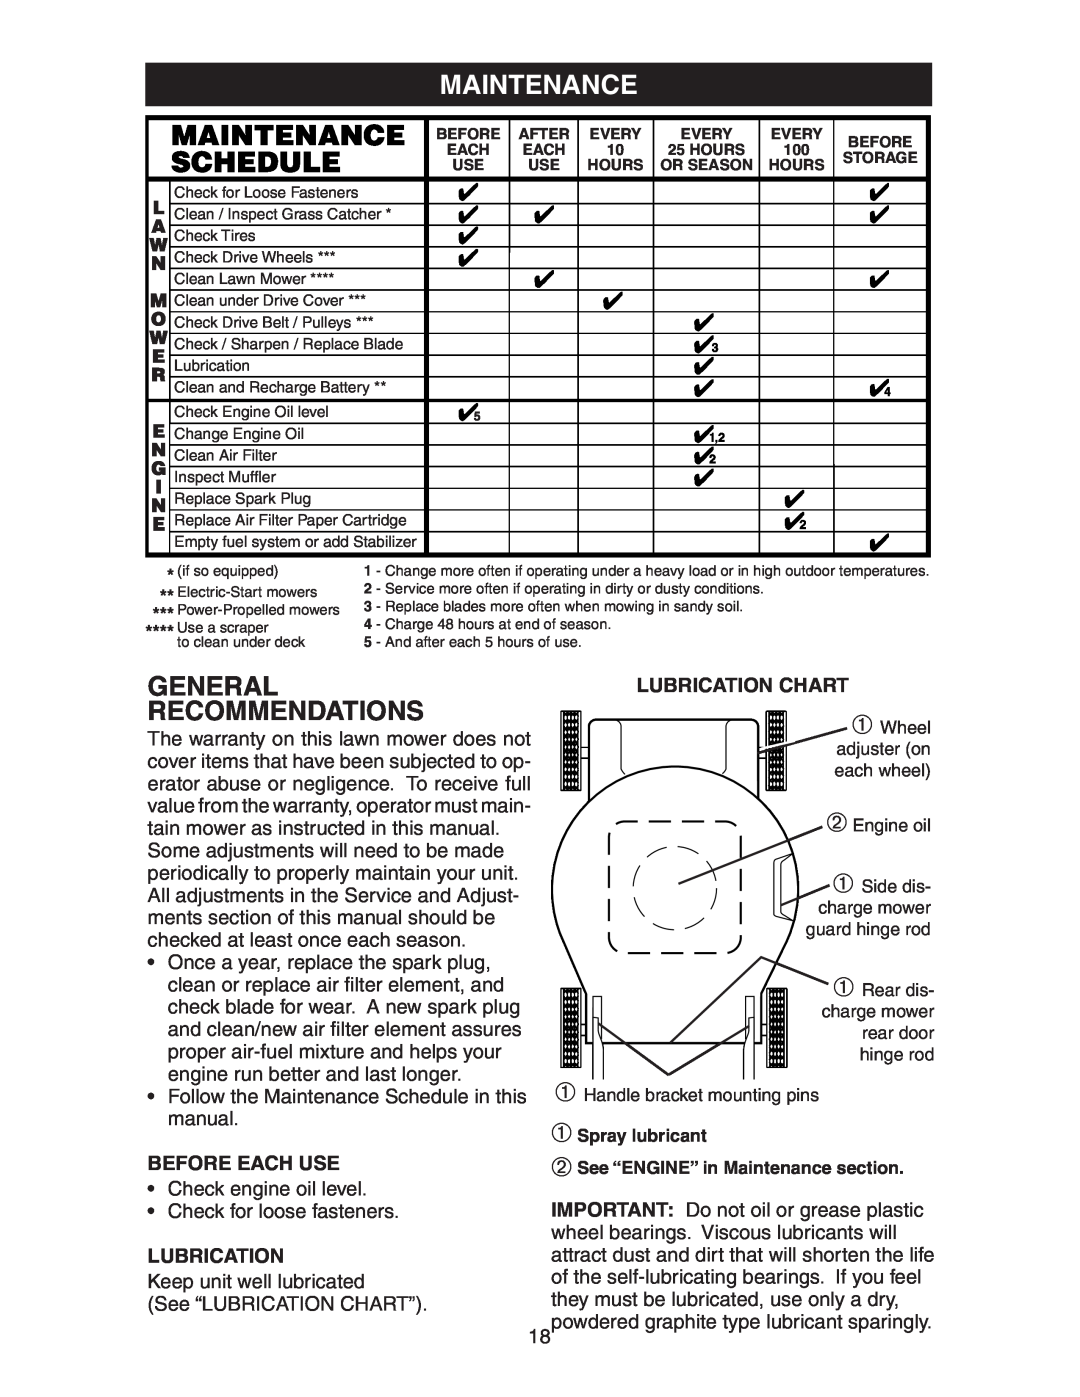 Poulan 193747 manual Maintenance, General Recommendations, Before Each Use, Lubrication Chart 